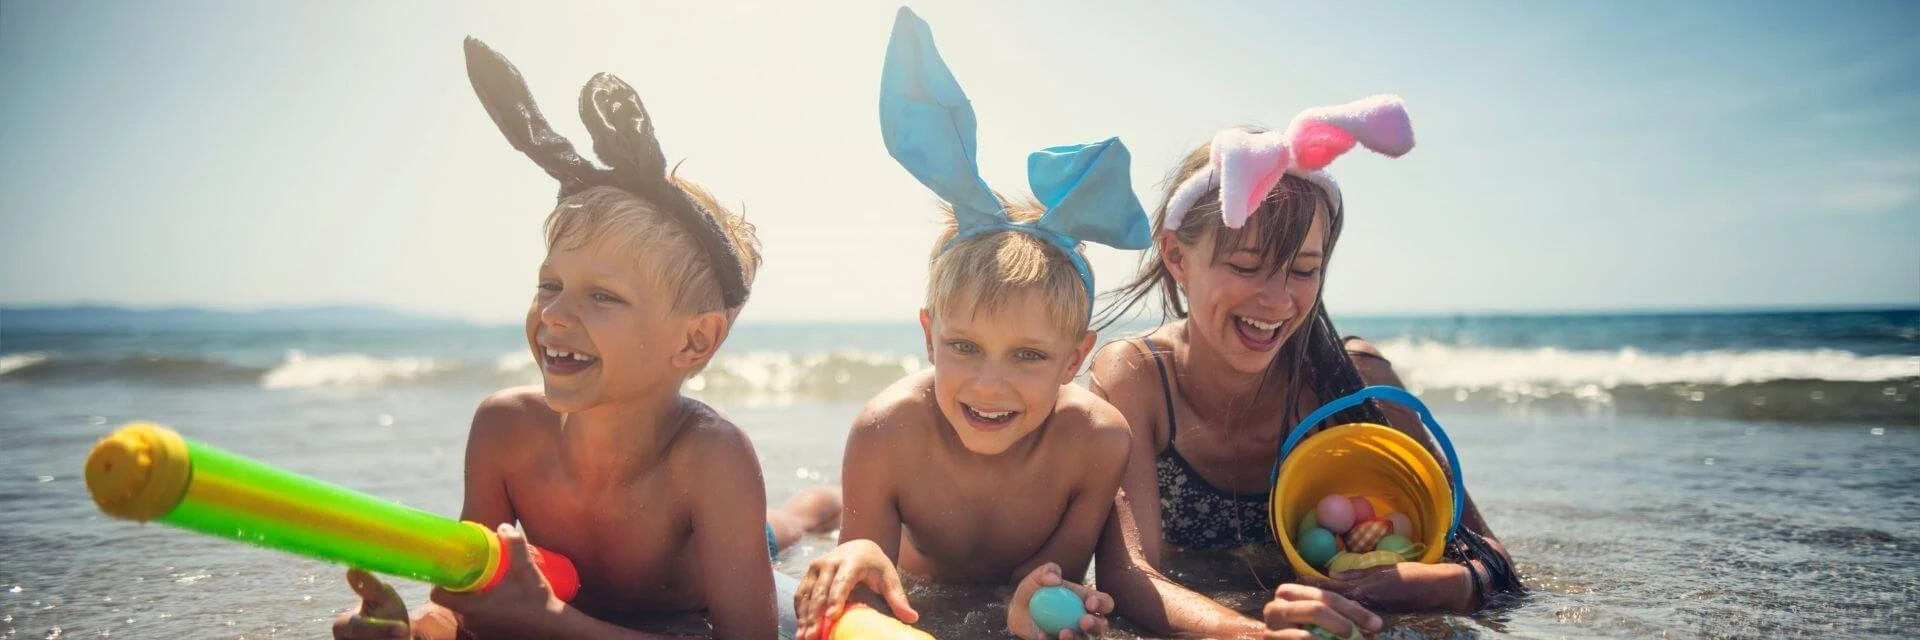 Medora Orbis: Give your family the best Easter gift